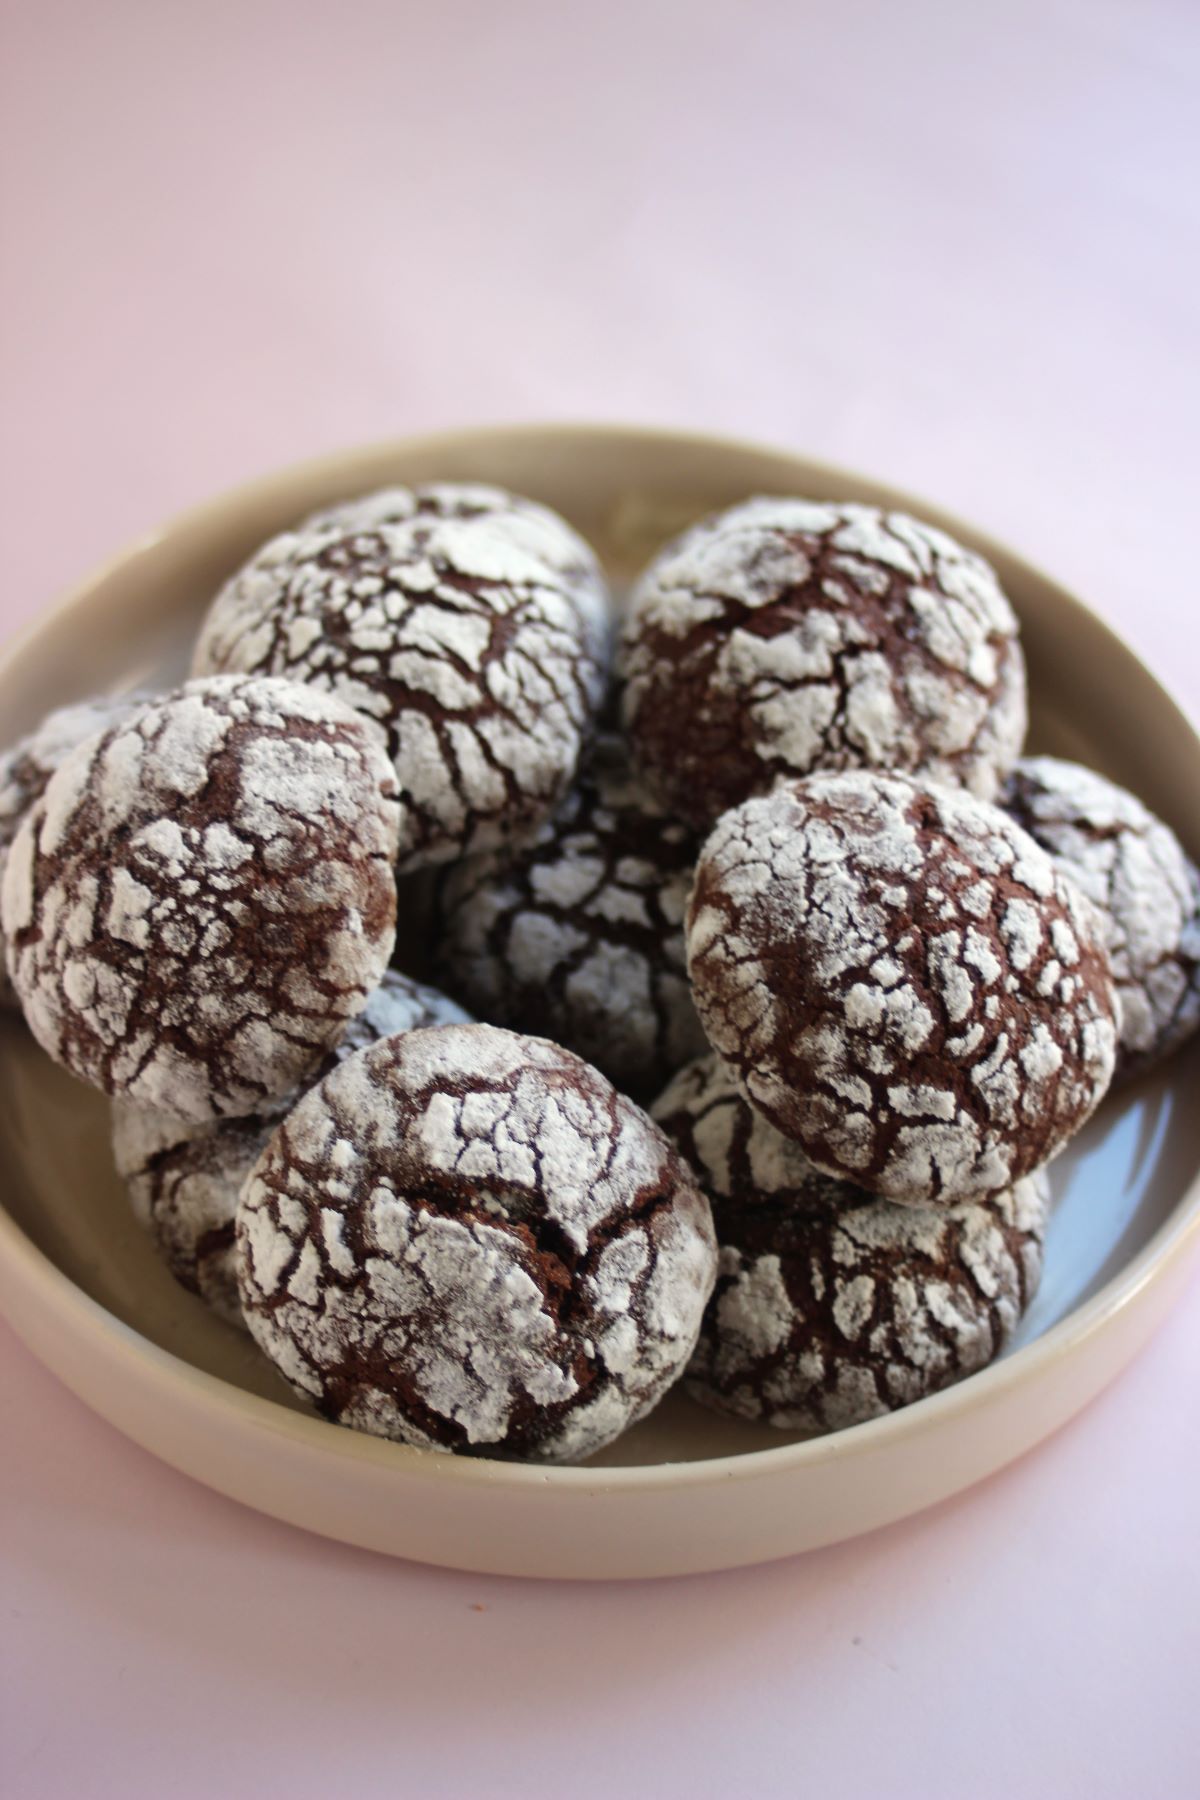 Many chocolate crinkle cookies on a plate.